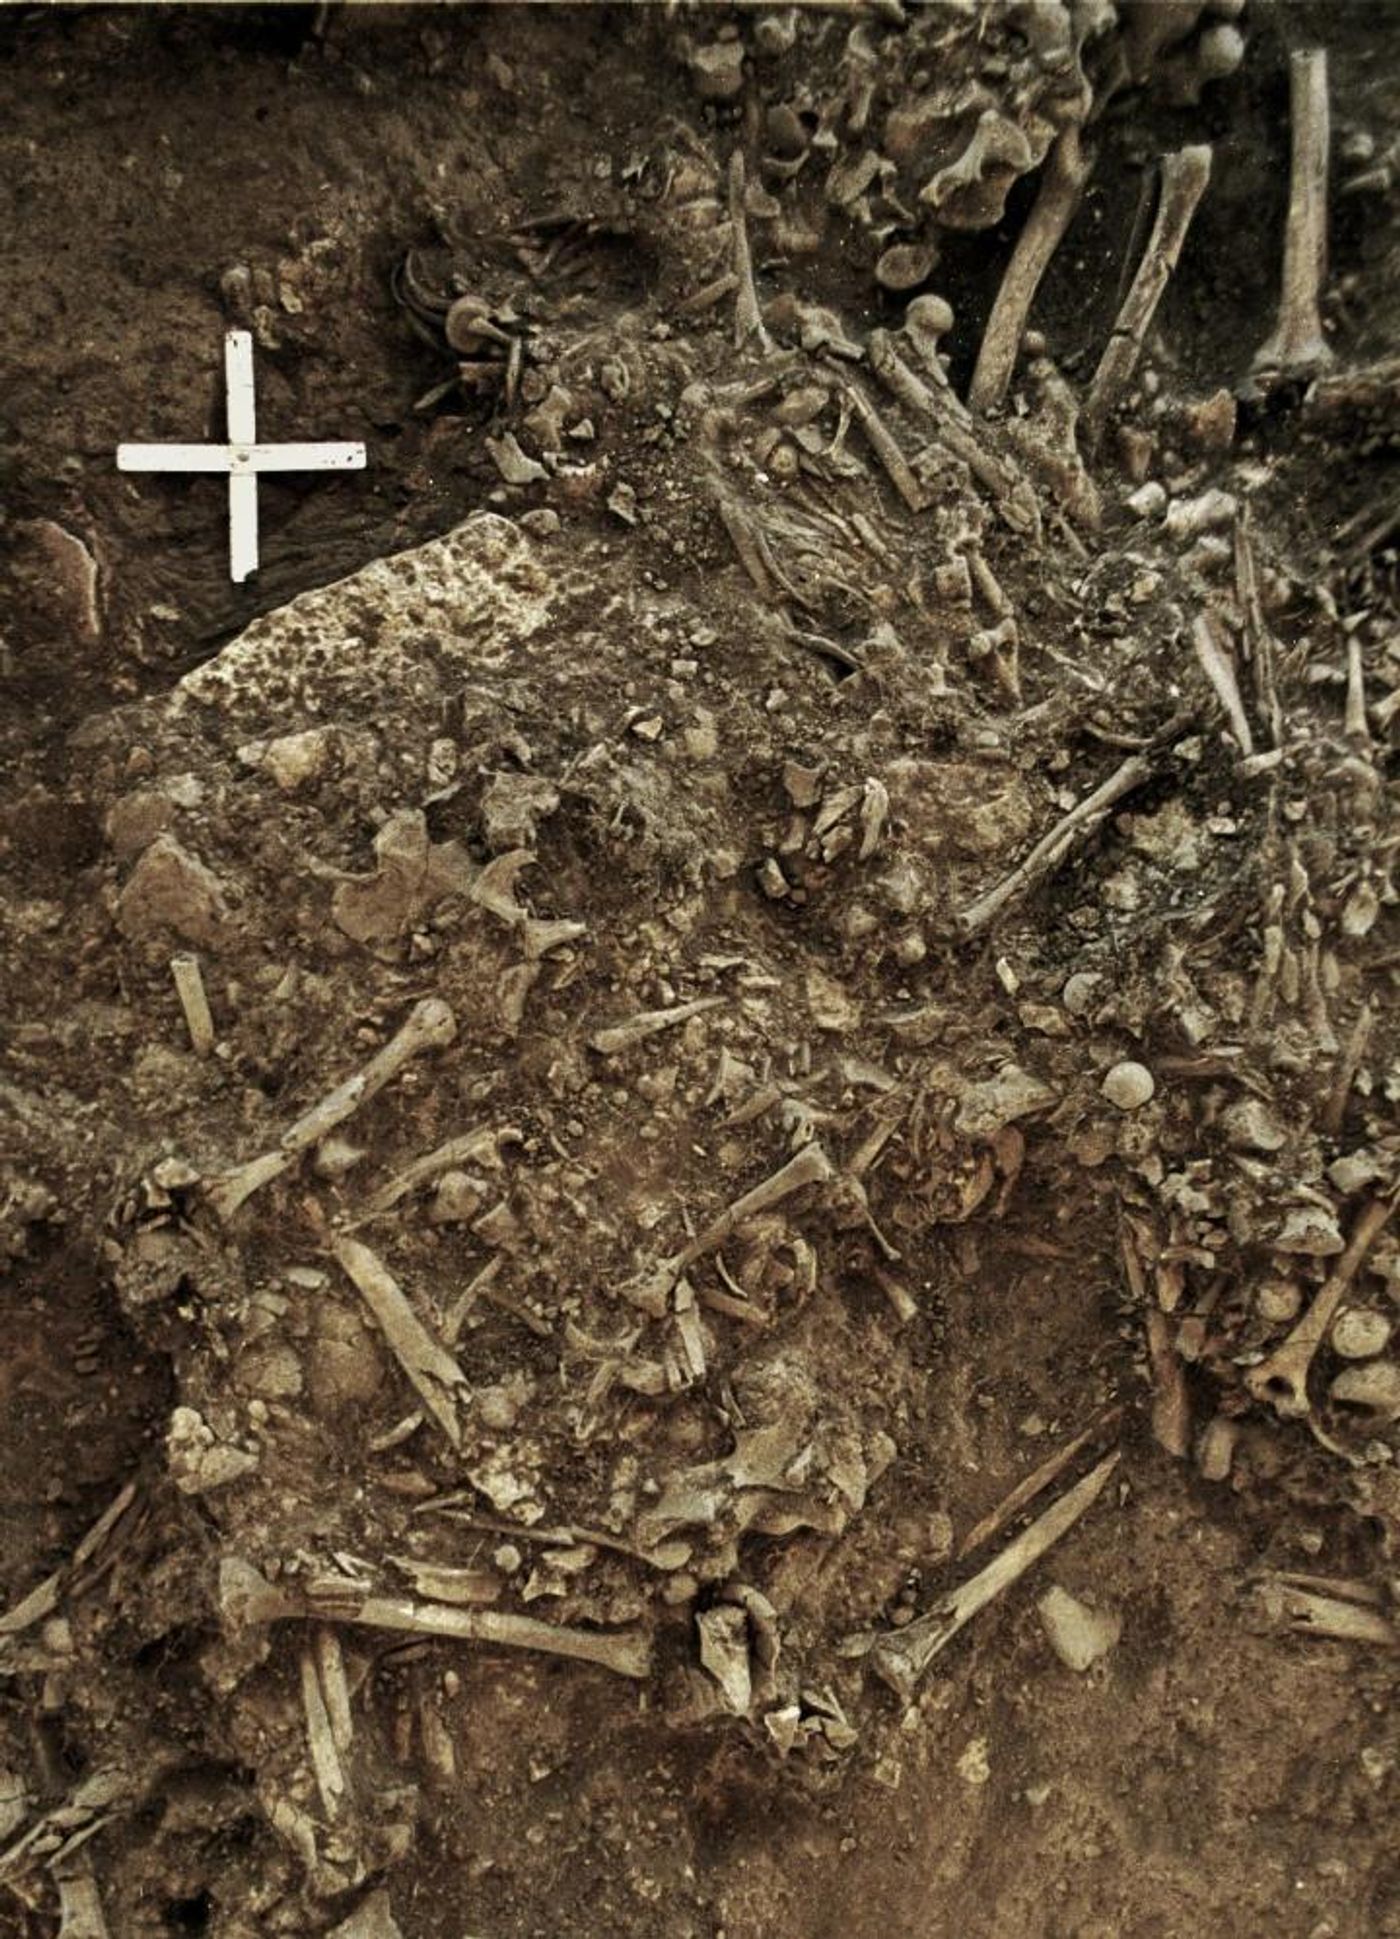 This image shows the remains of a 20-year old woman (Gokhem2) from around 4900 BP that was killed by the first plague pandemic. She was one of the victims of a plague pandemic that likely lead to the decline of the Neolithic societies in Europe. / Credit: Karl-Göran Sjögren / University of Gothenburg